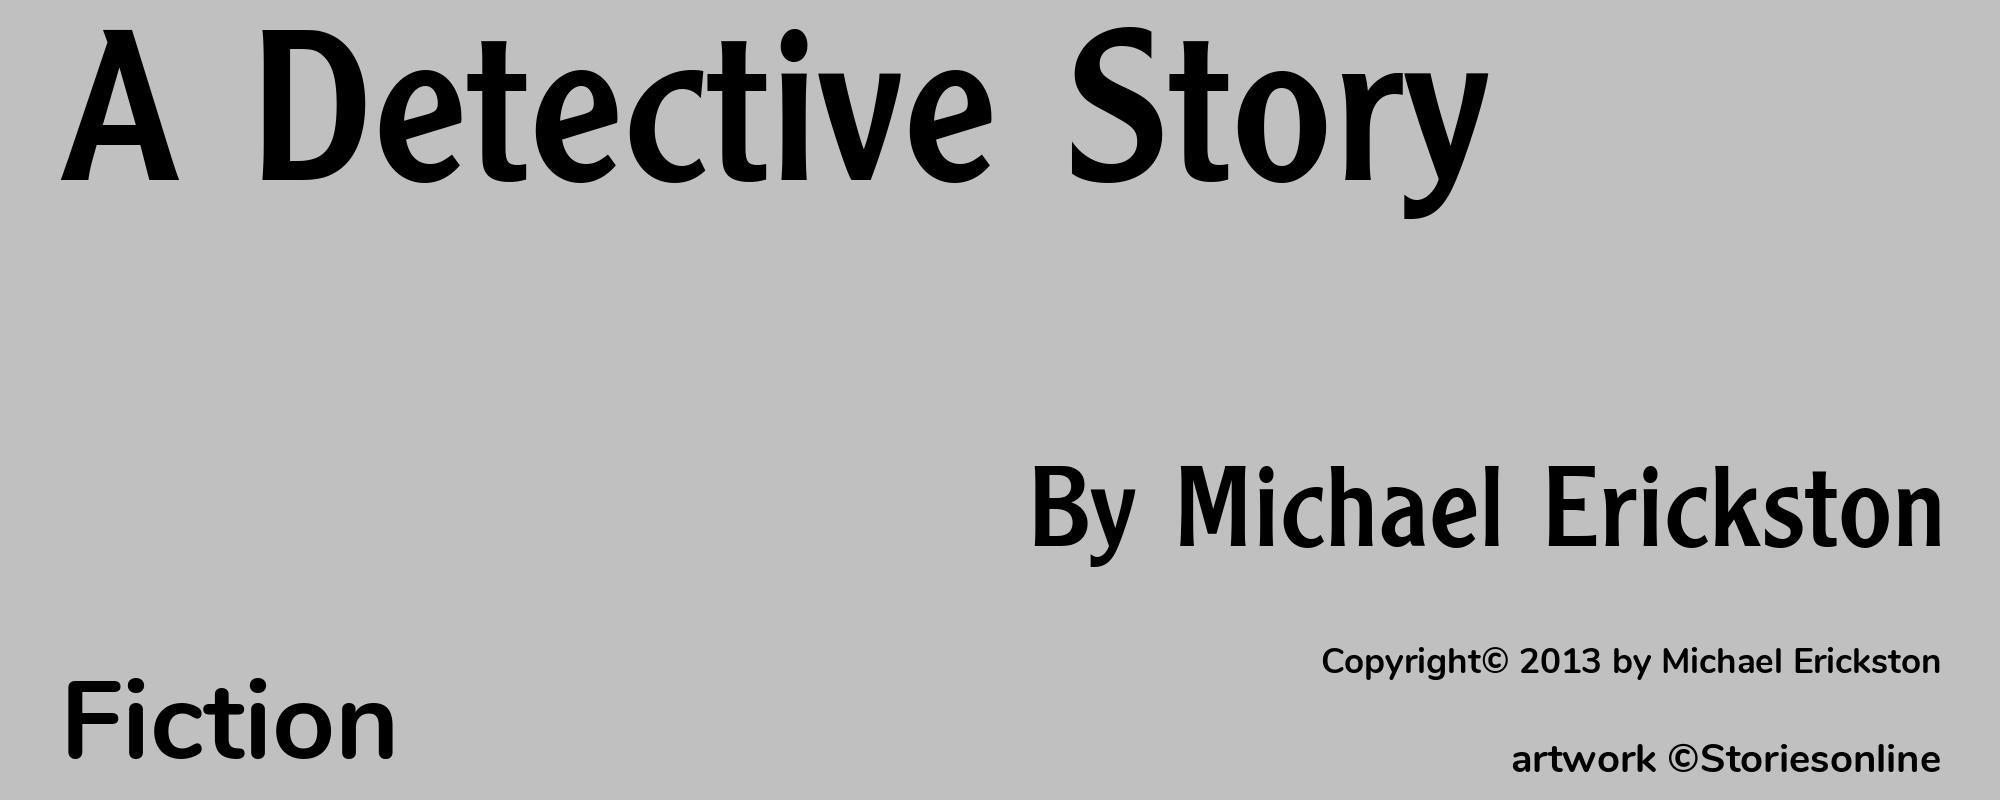 A Detective Story - Cover